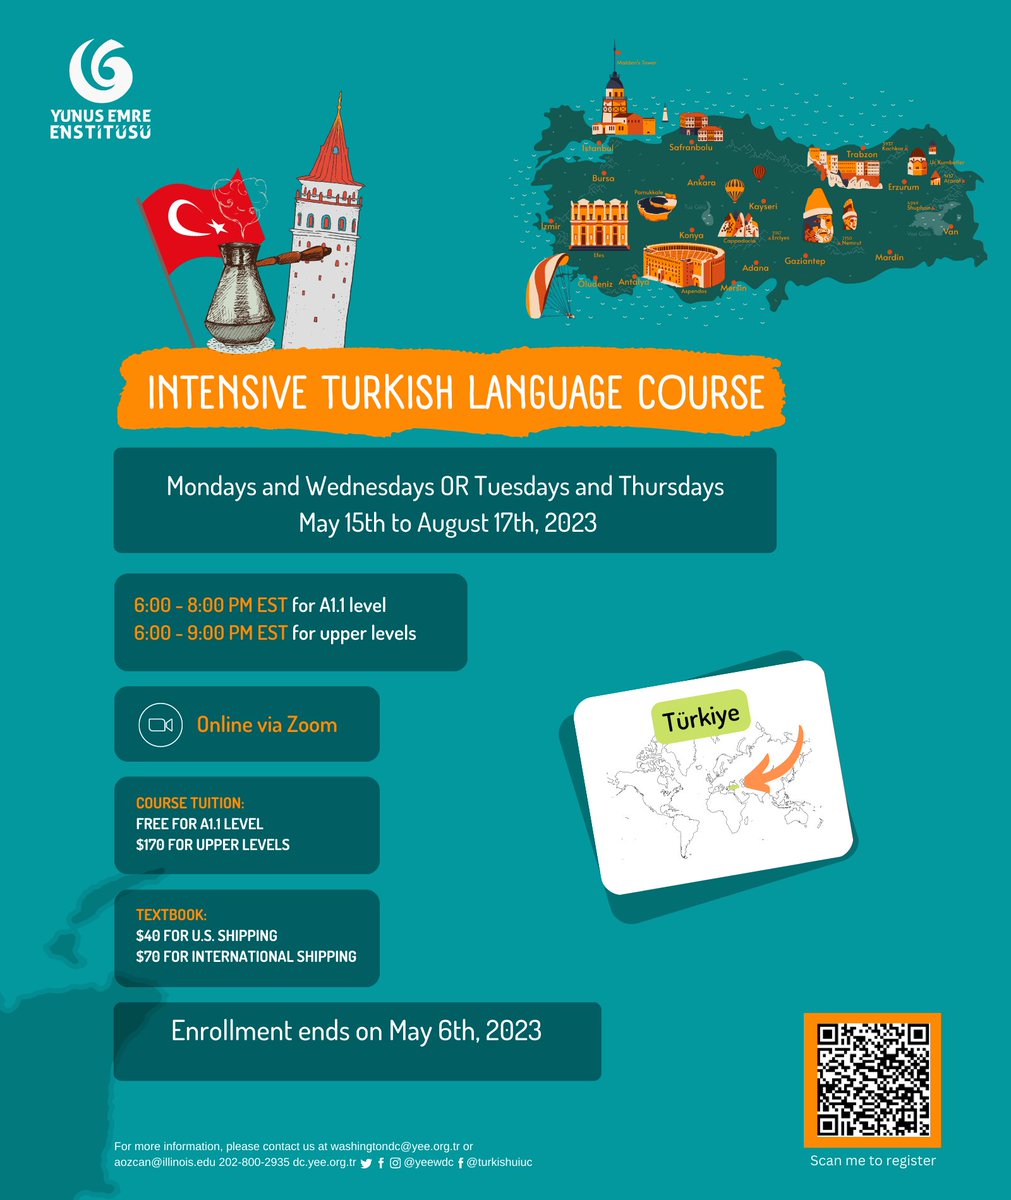 Merhaba👋
Looking to improve your #Turkish to communicate with over 90 million people without any obstacles?
📚Enroll in the online #TurkishLanguage courses from A1.1 to C1.2 level this #summer to speak Turkish as a #secondlanguage😎
👉🏽tinyurl.com/TLCSummer23 
#CulturalDiplomacy